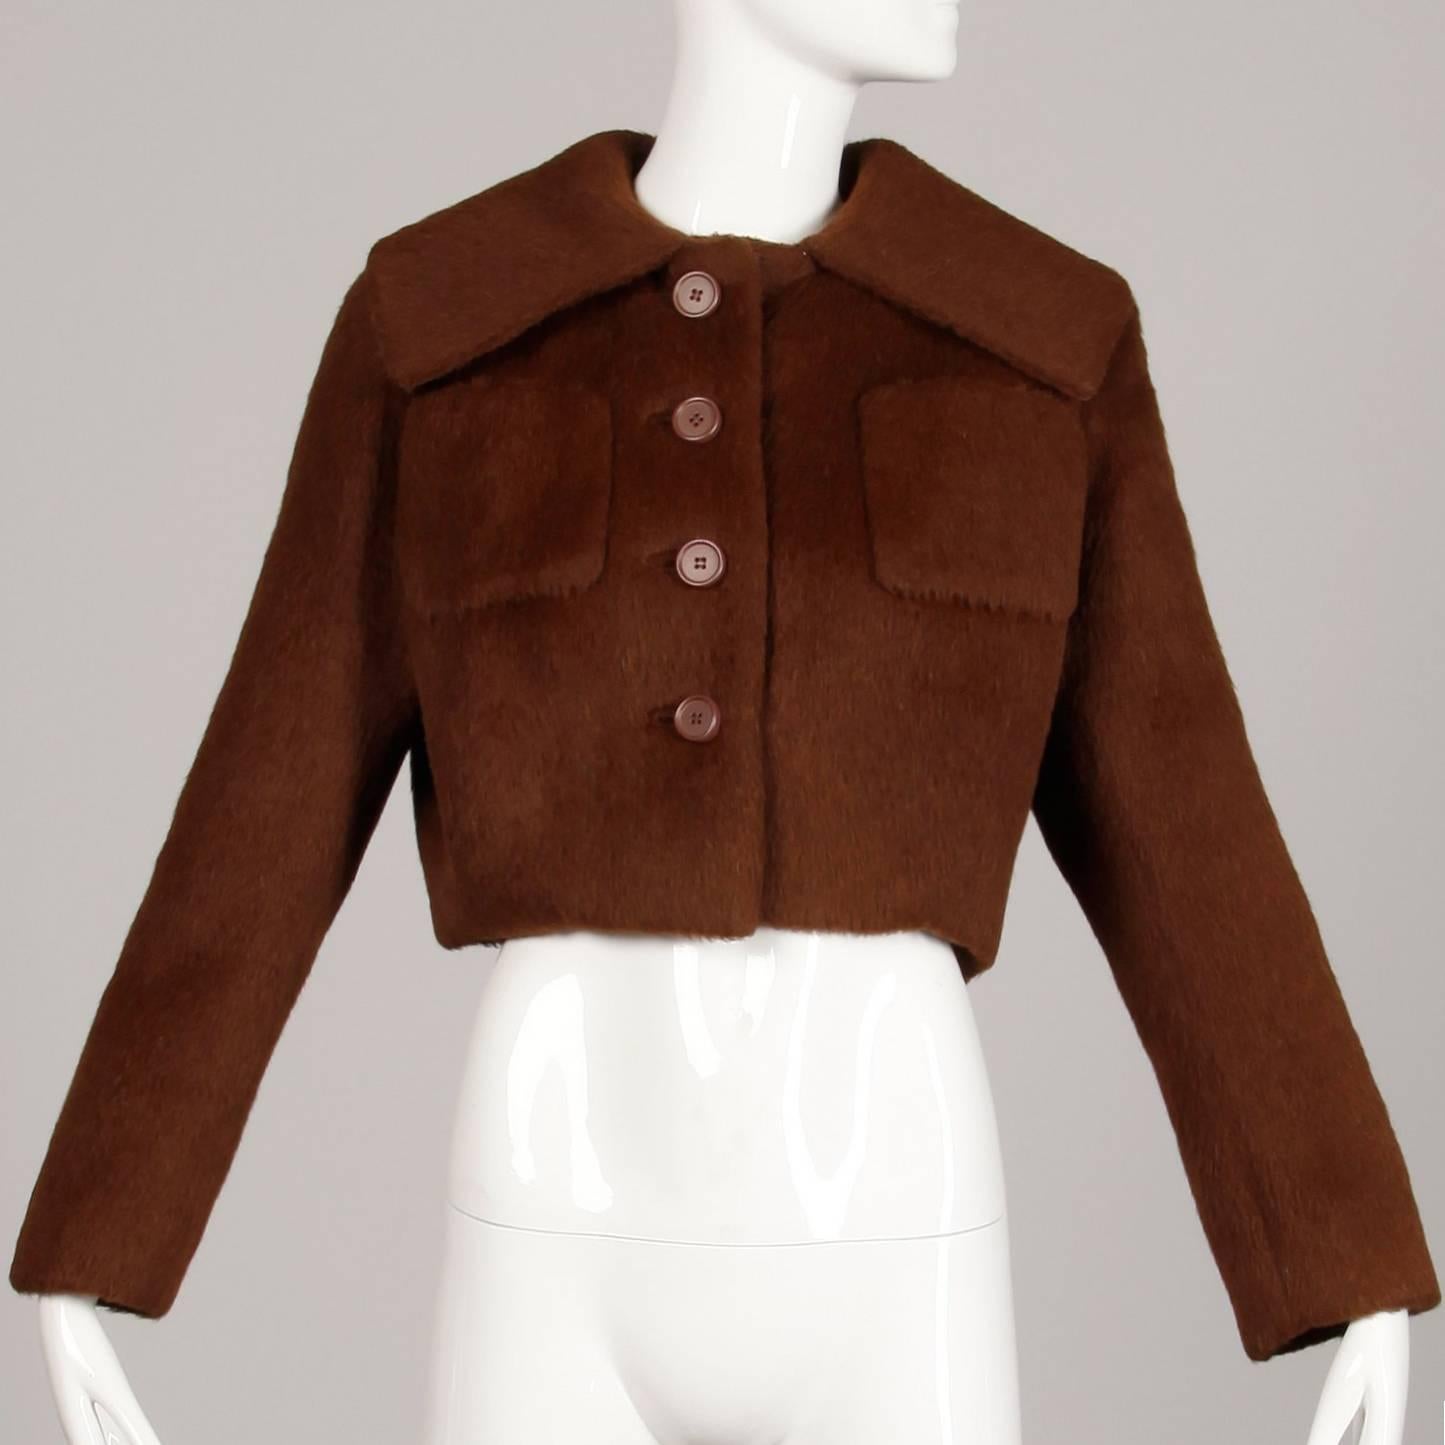 Absolutely stunning construction! Vintage 1960s Norman Norell brown wool jacket with a pop up portrait collar. Fully lined in silk with front button and snap closure. Front patch pockets. Fits like a size medium-large. The bust measures 44